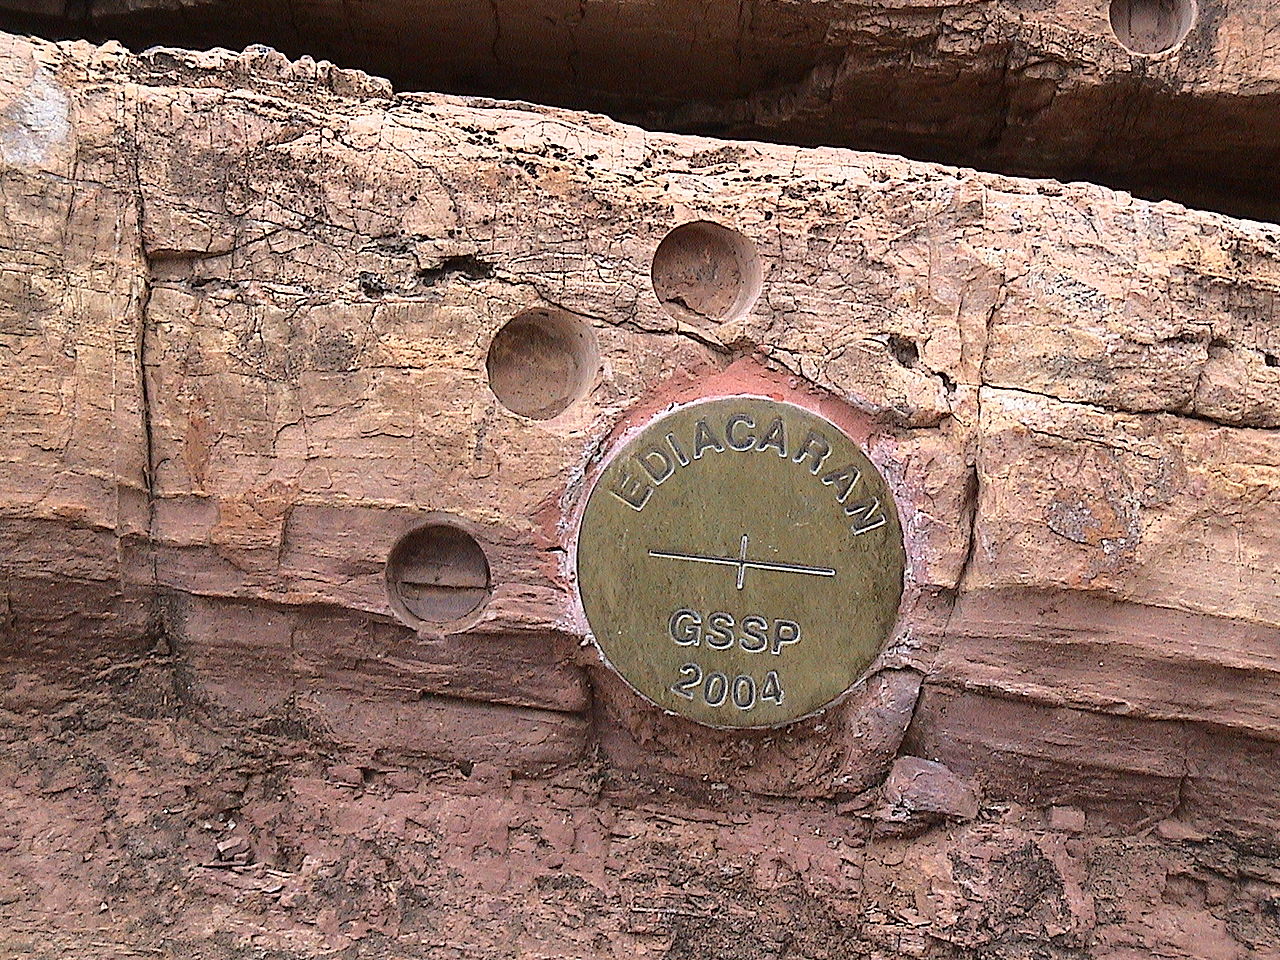 Photo of the GSSP located in the Ediacara Hills of South Australia that marks the start of the Ediacaran Period